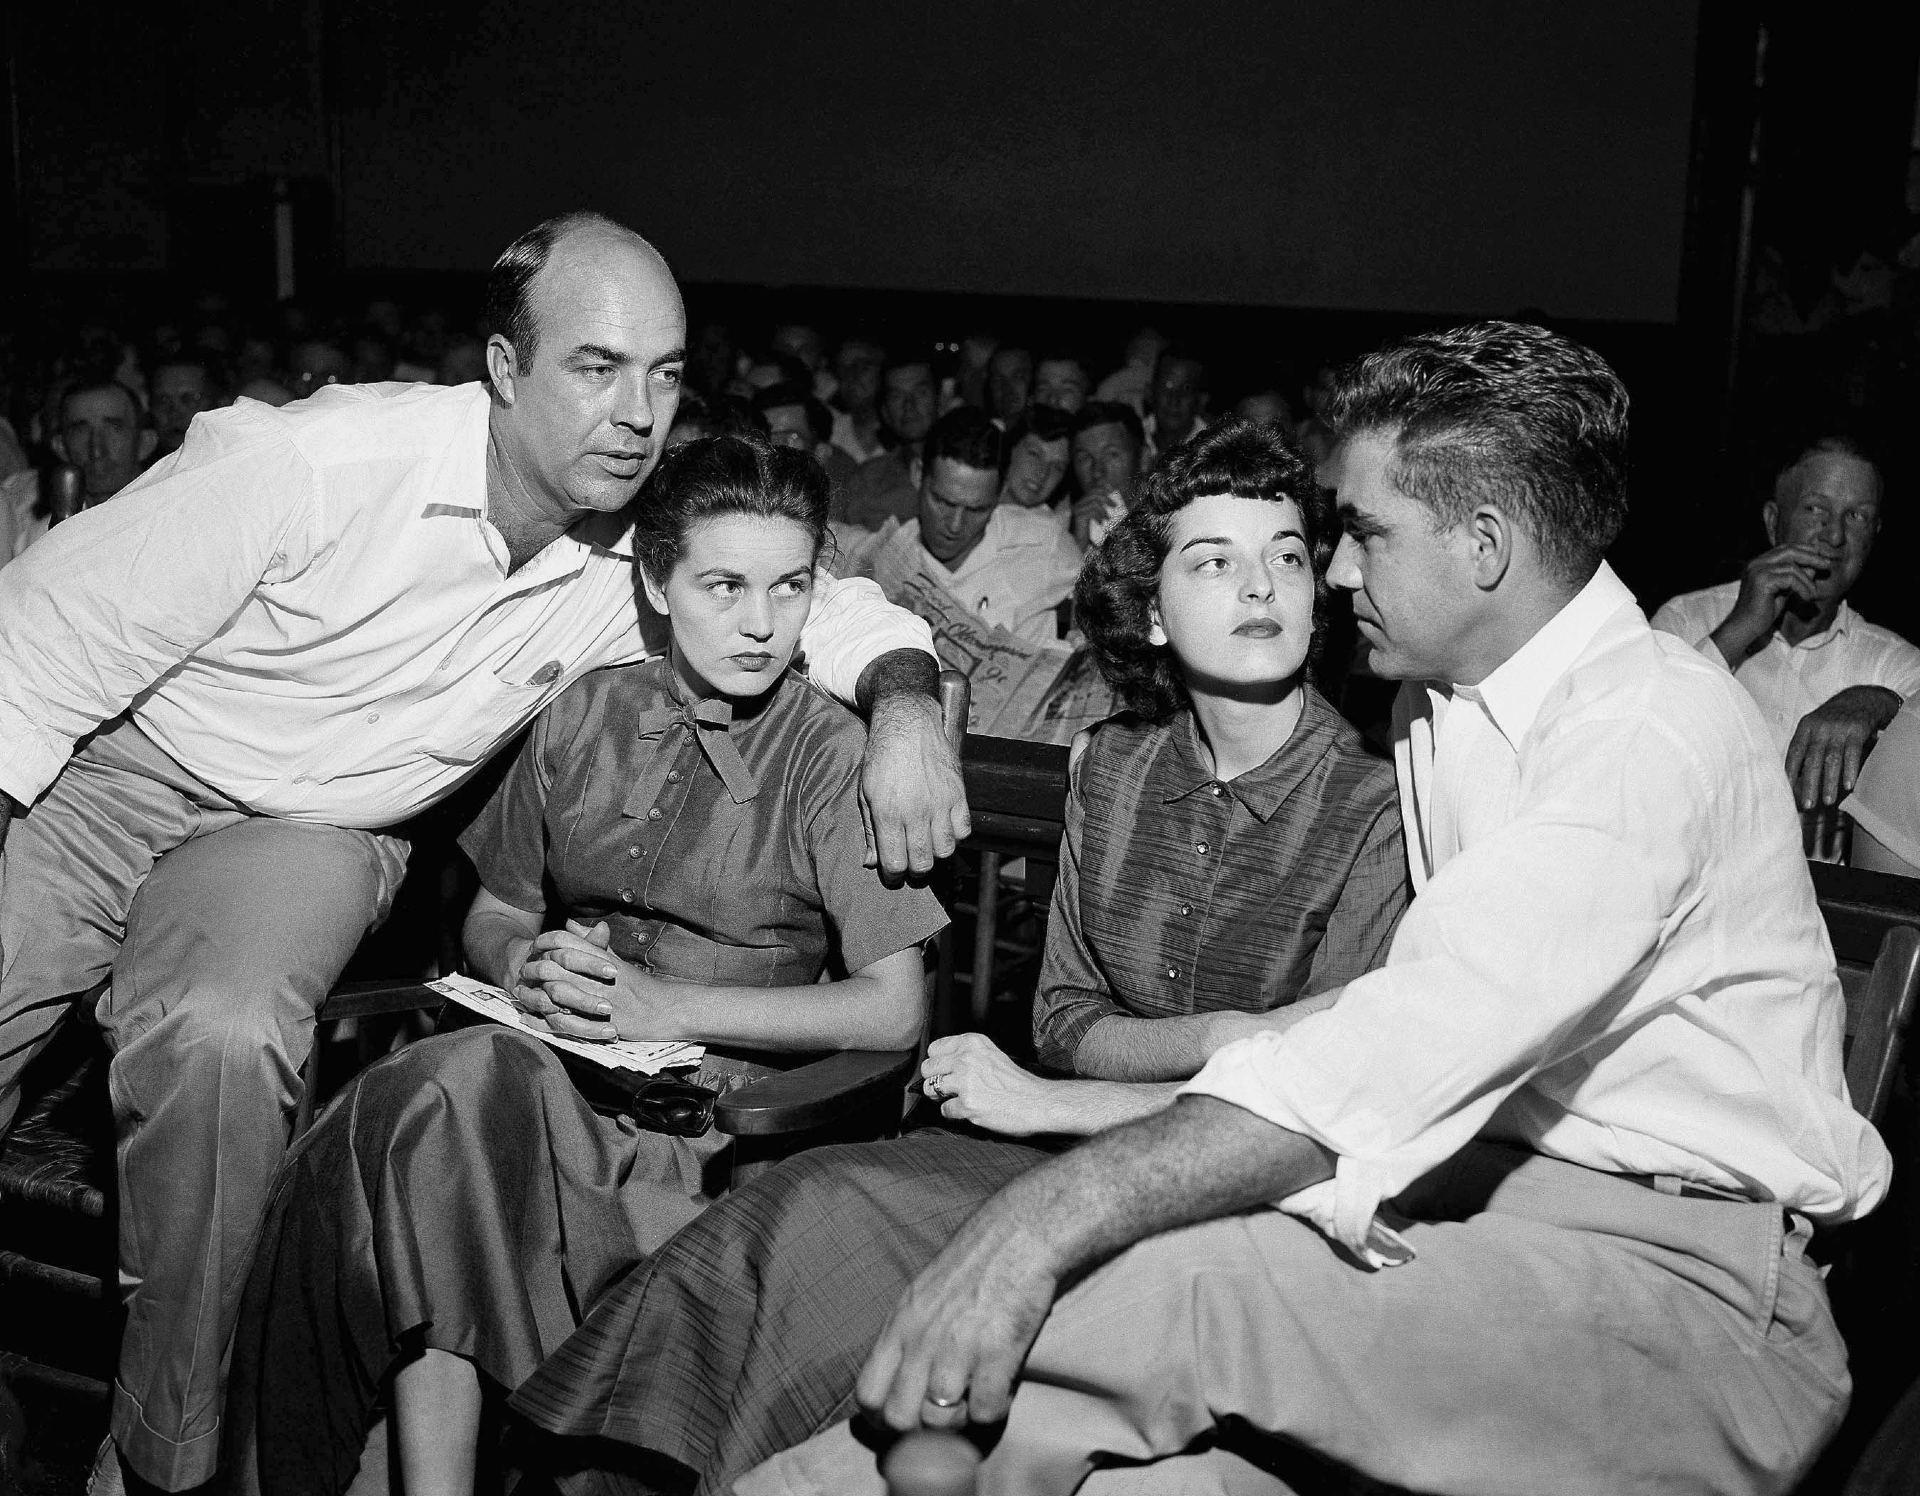 In this Sept. 23, 1955, file photo, J.W. Milam, left, his wife, second from left, Roy Bryant, far right, and his wife, Carolyn Bryant, sit together in a courtroom in Sumner, Miss. (AP Photo, File)